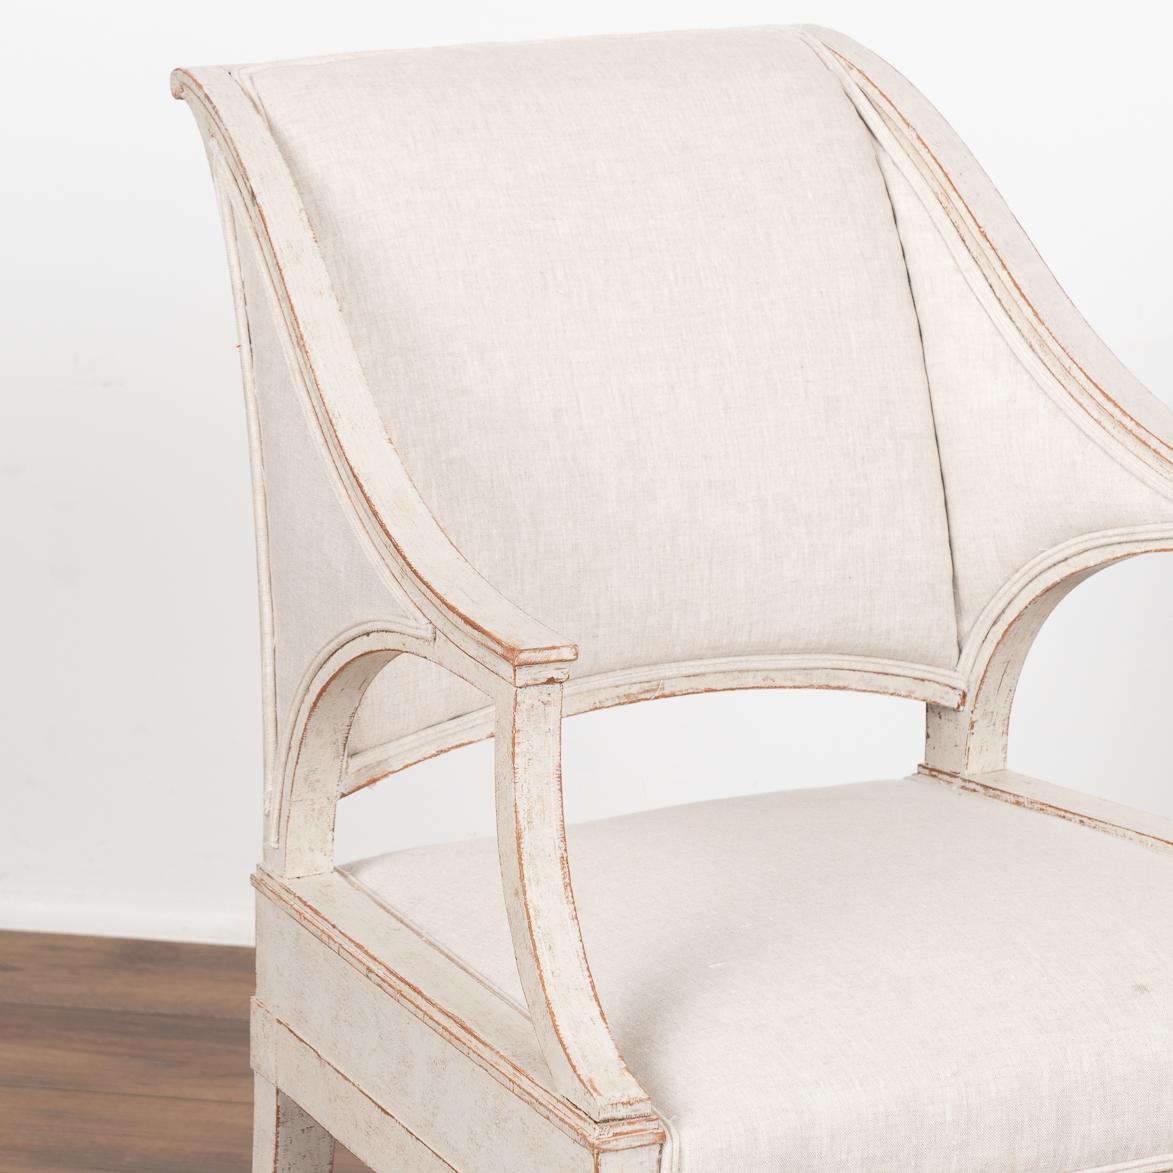 Set of Four Swedish Gustavian White Painted Arm Chairs, circa 1820-40 6